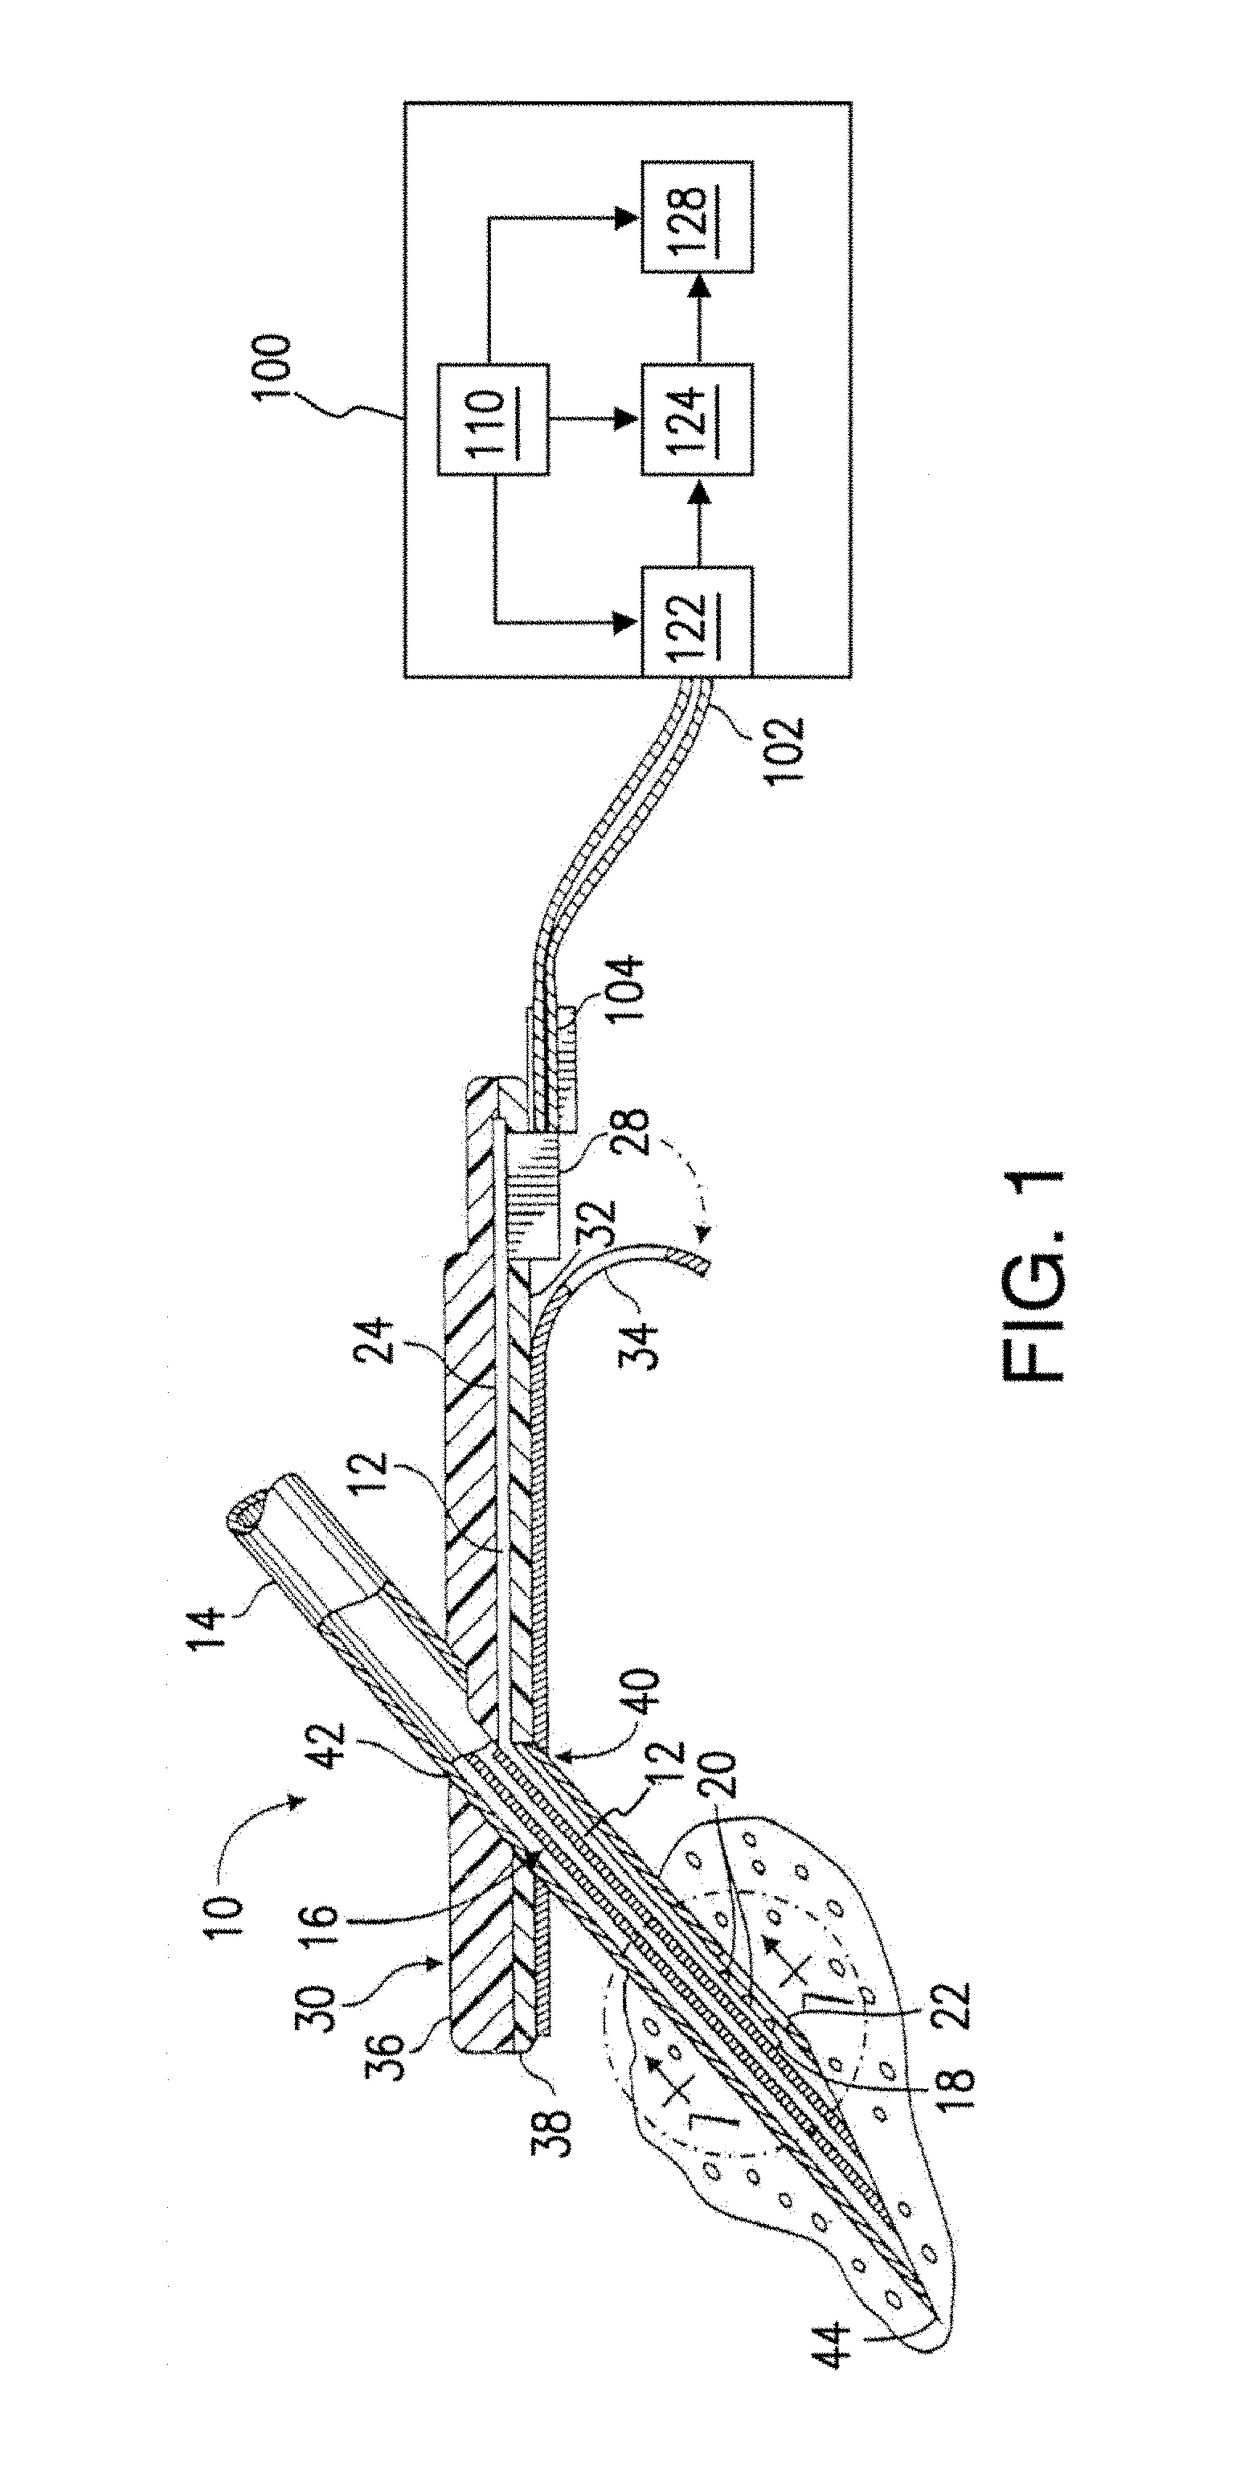 Methods, systems, and devices for sensor fusion